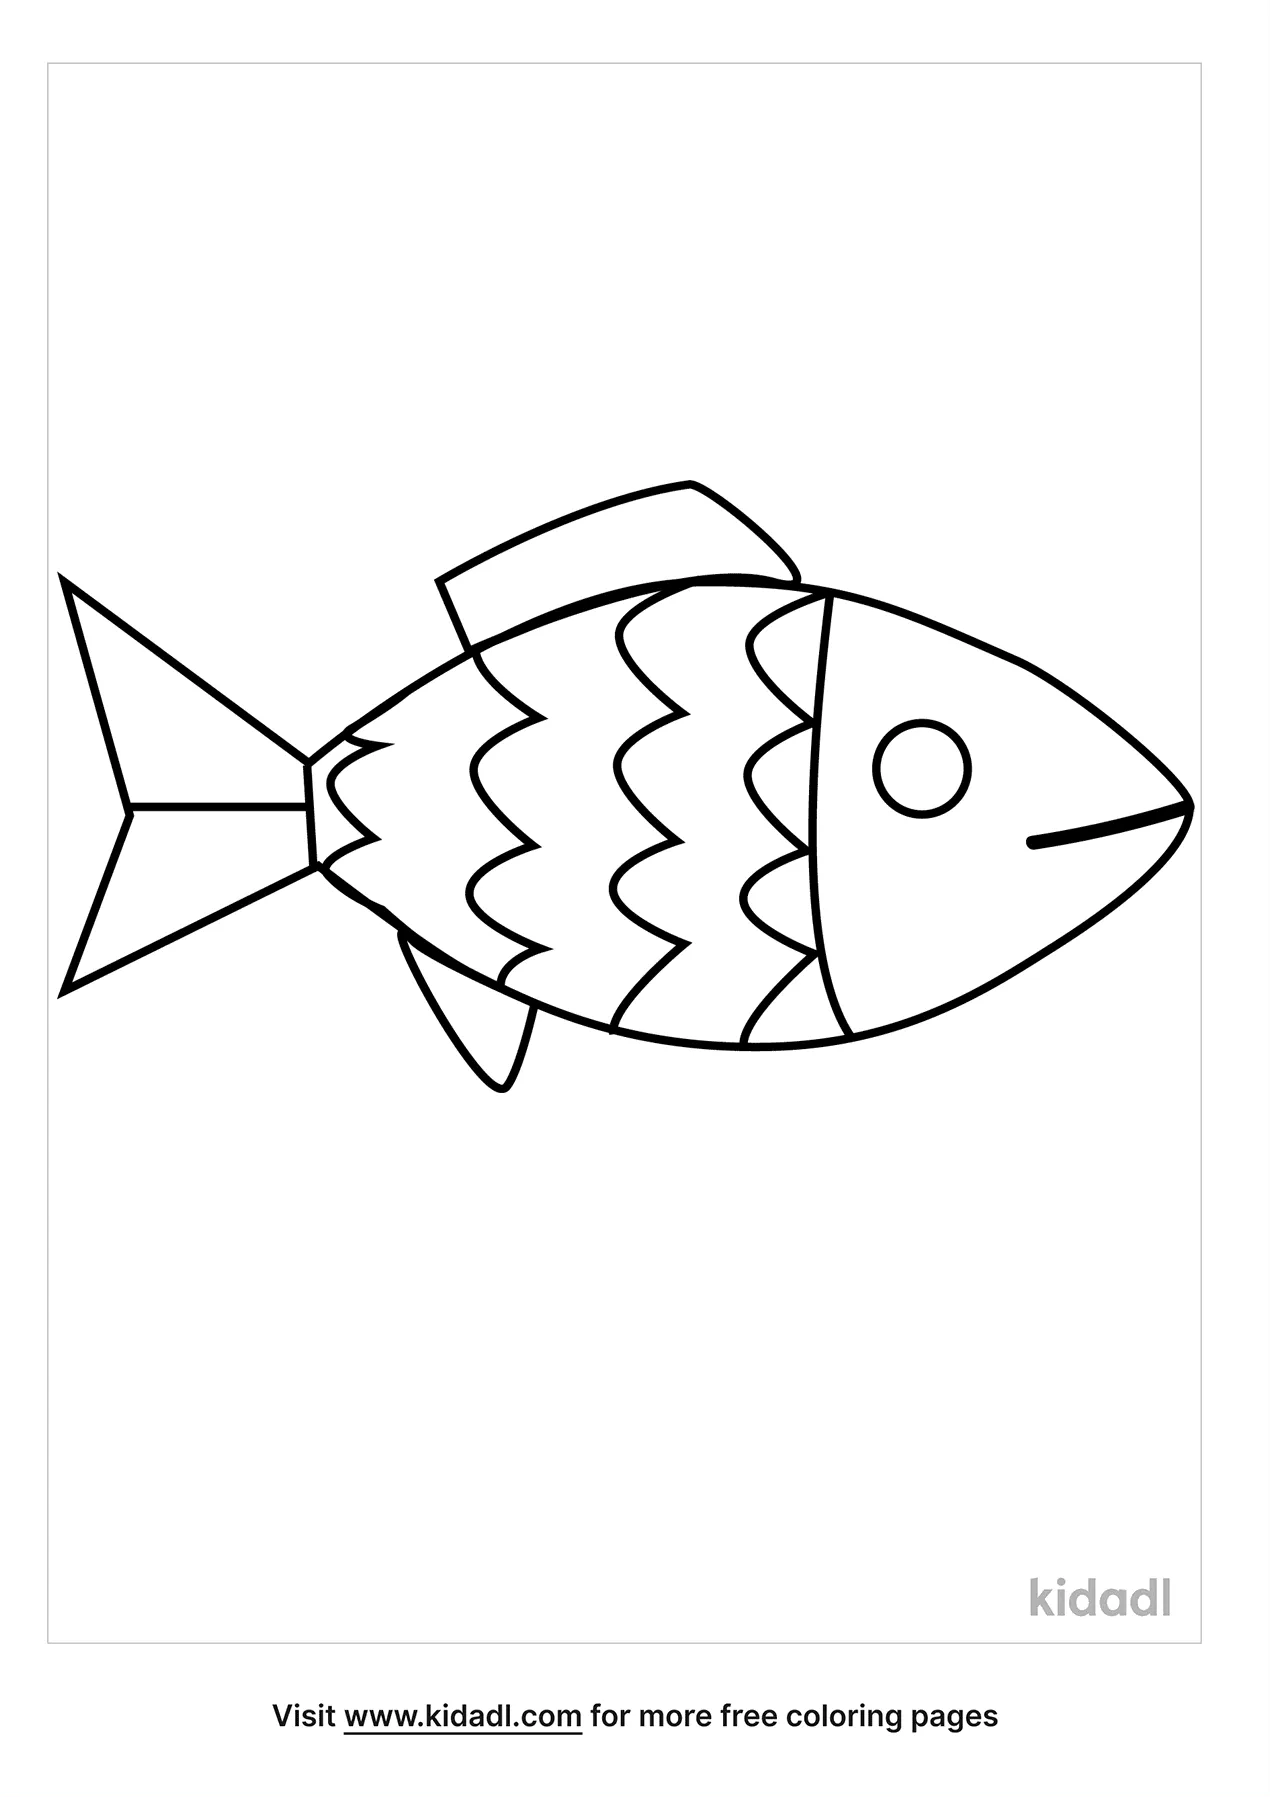 Fish Outline Coloring Pages